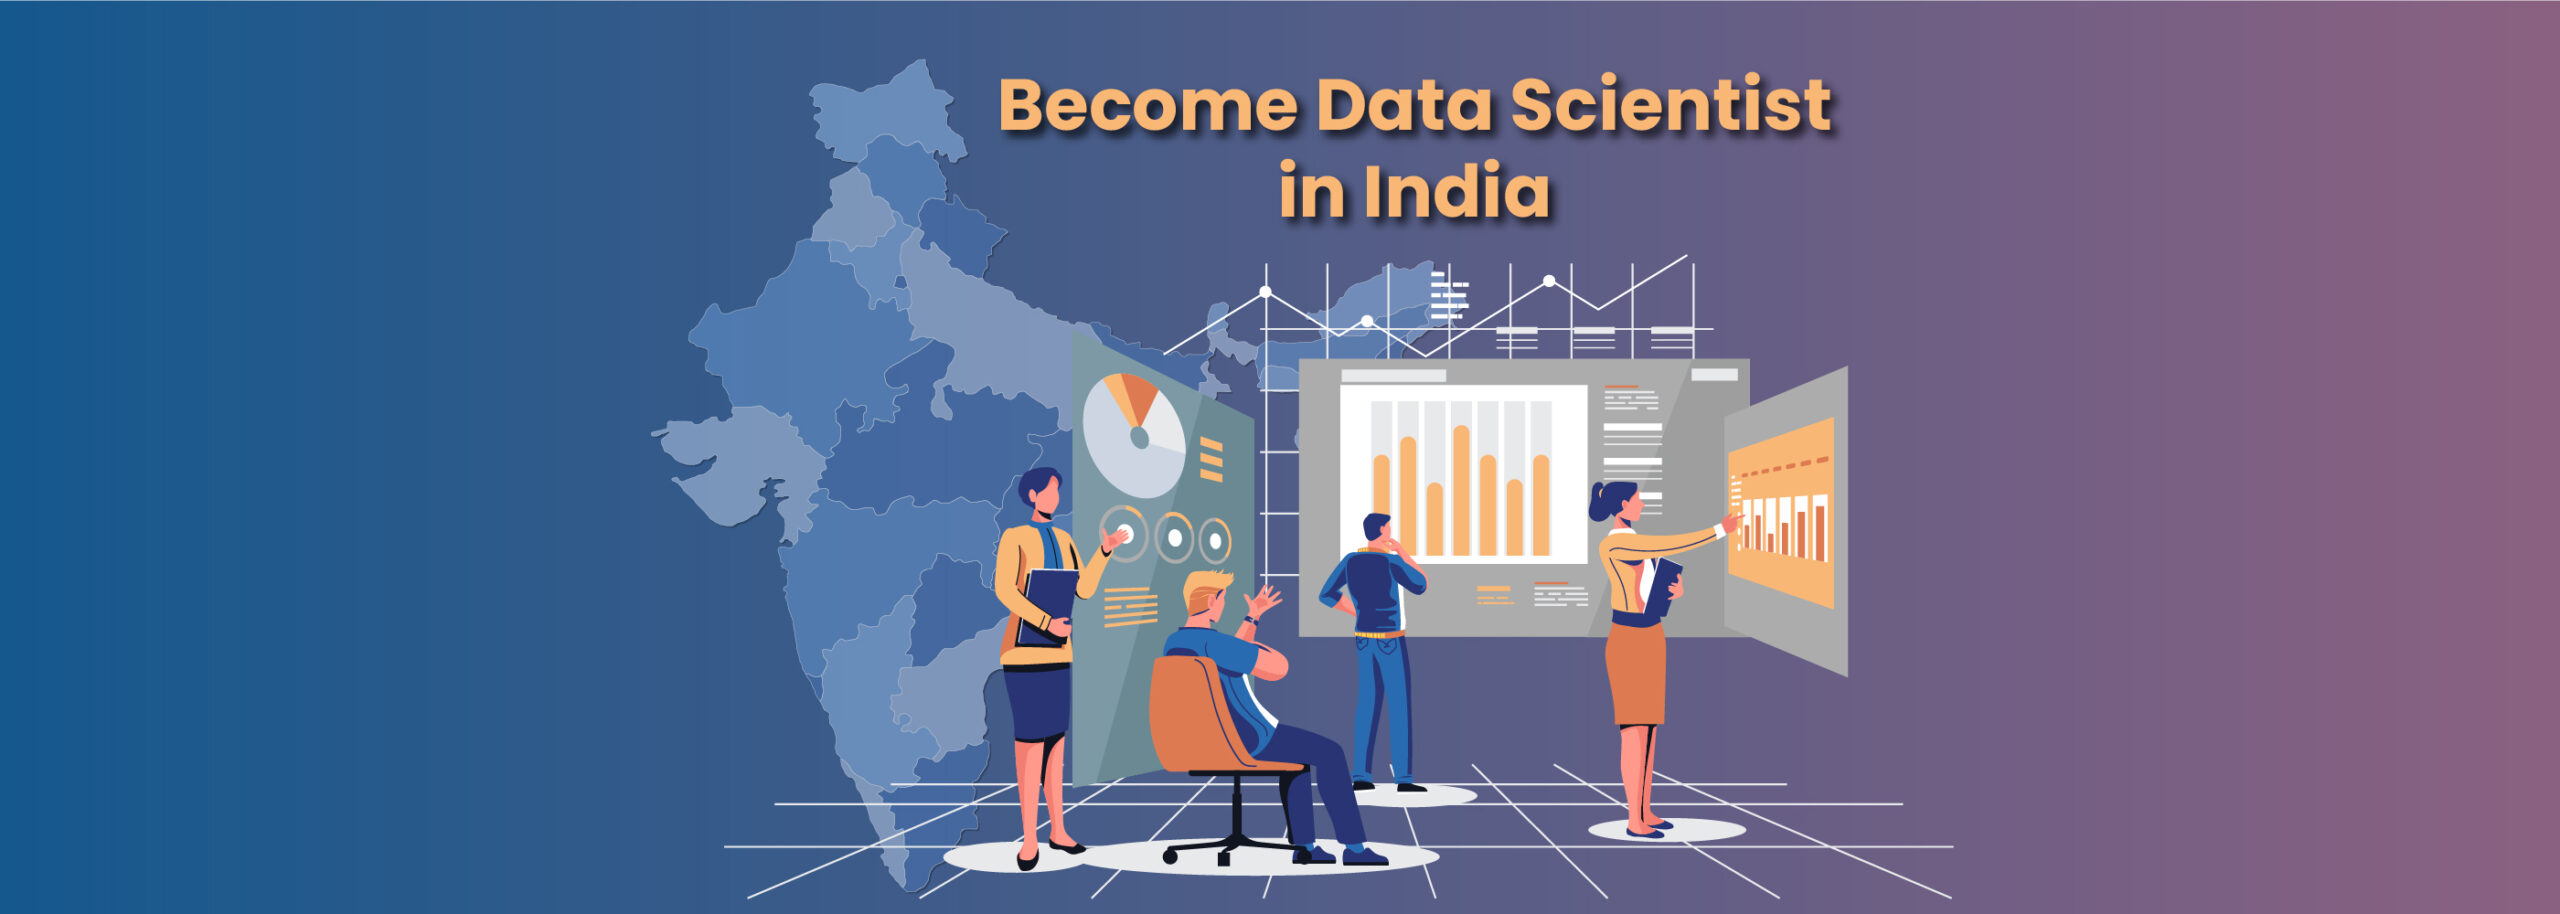 Become Data Scientist in India